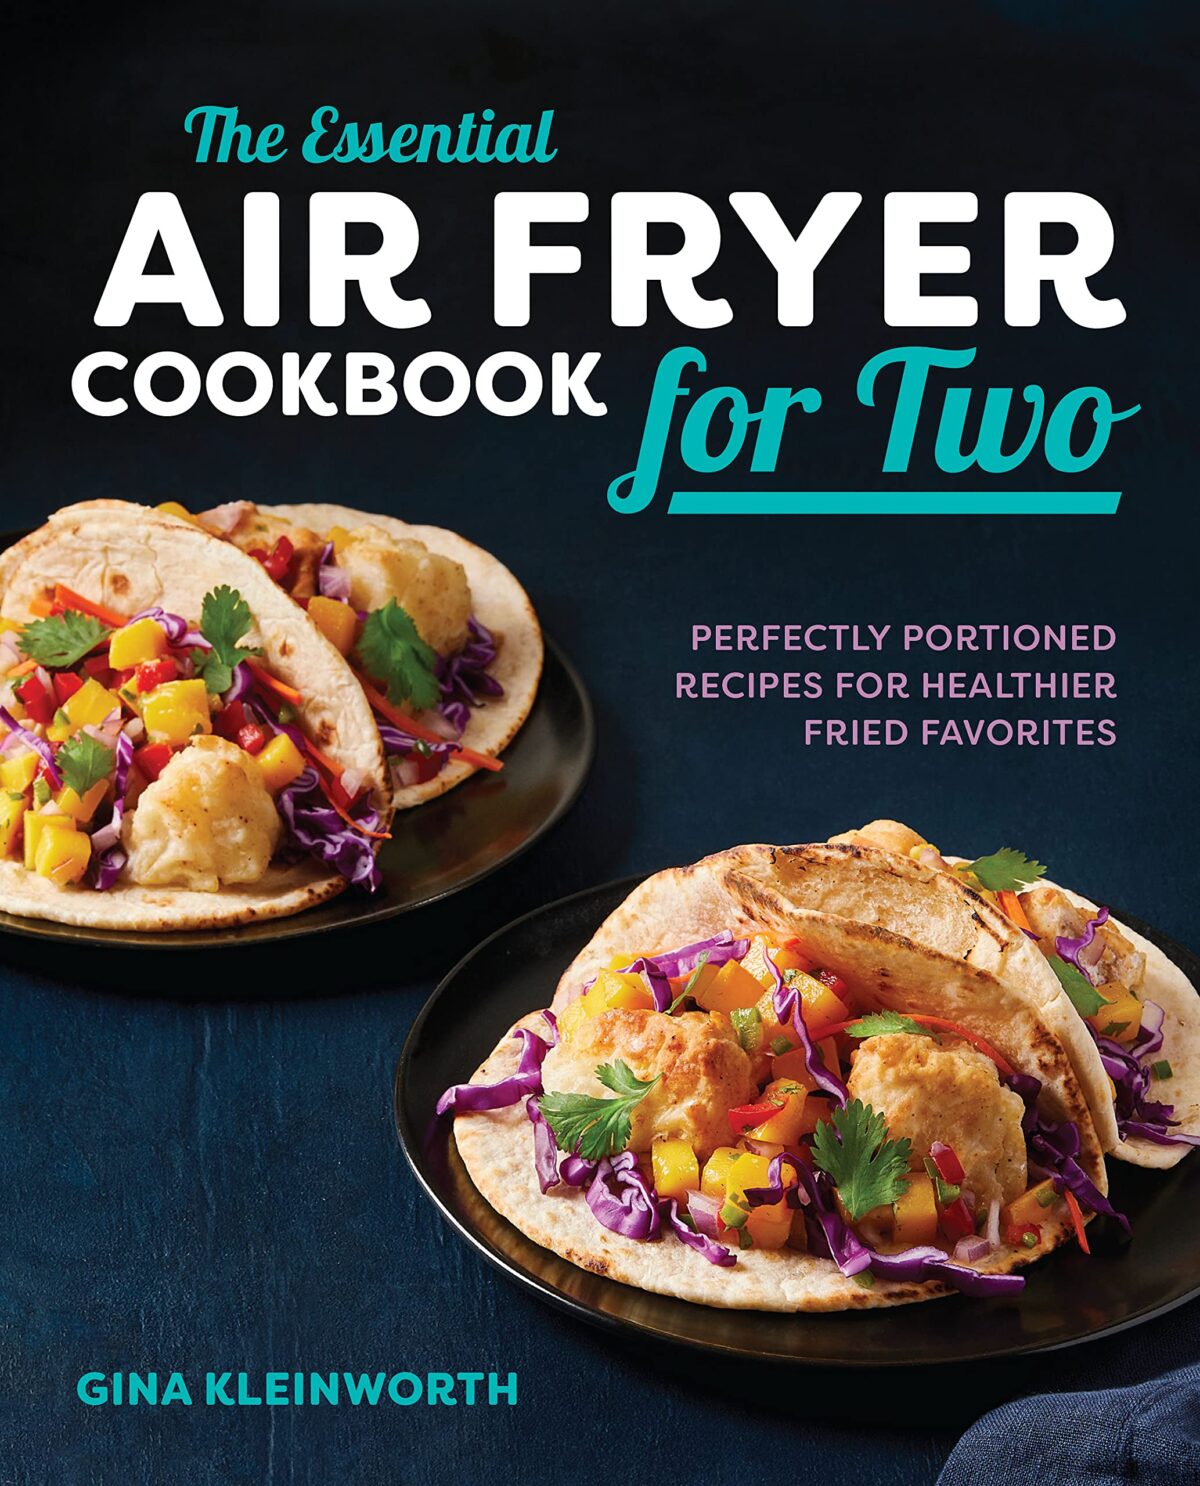 Air Fryer recipes for couples cooking together. | The Dating Divas